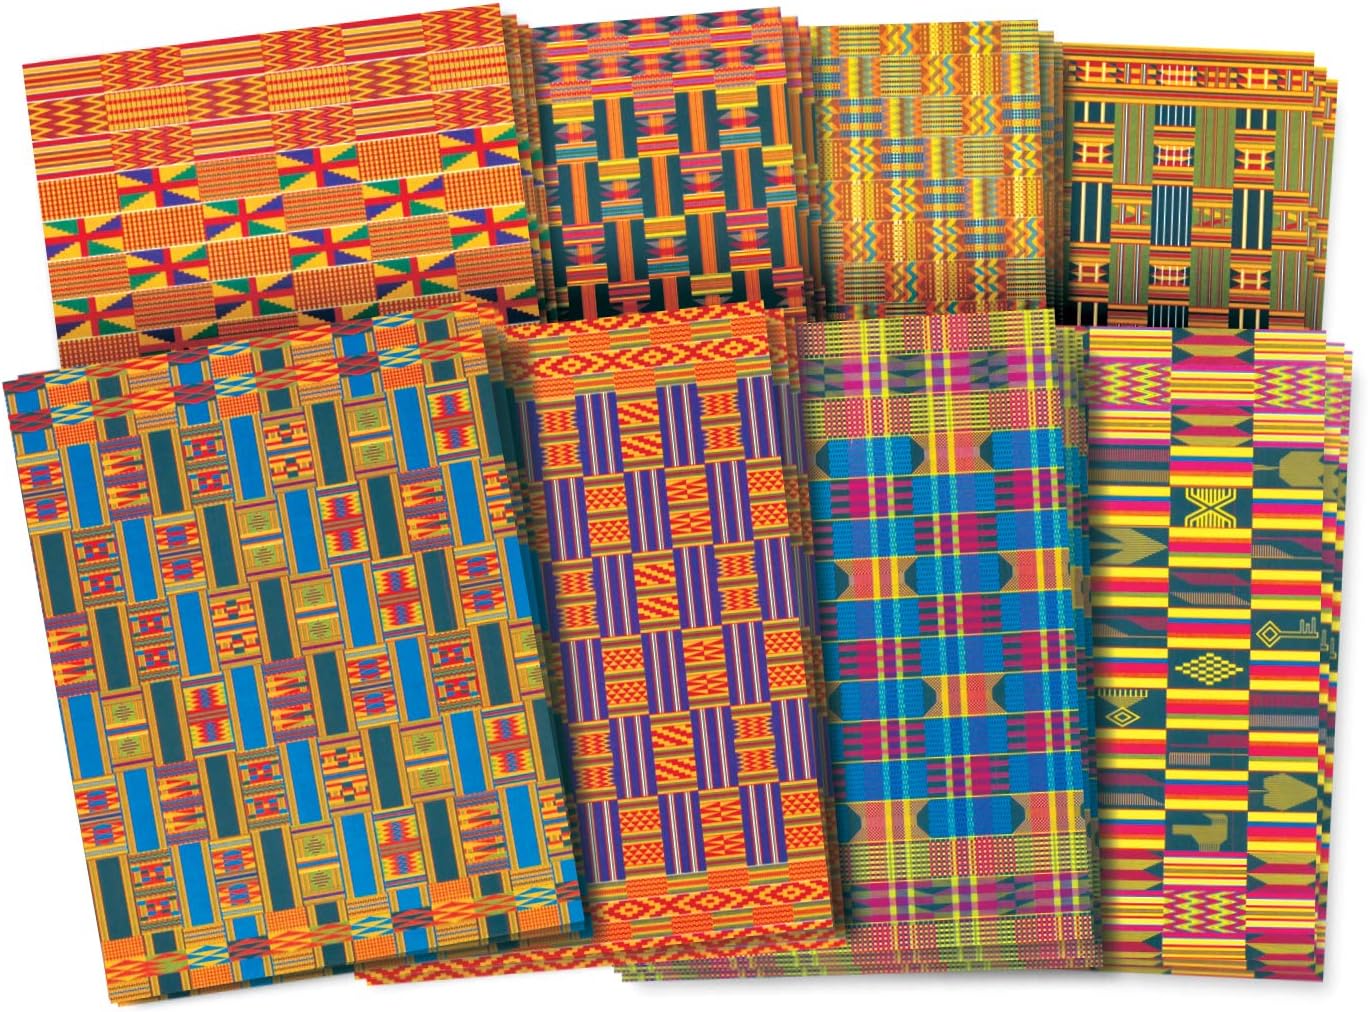 Roylco Assorted Design African Textile Paper, 8-1/2 x 11 Inches #R15273, Pack of 32